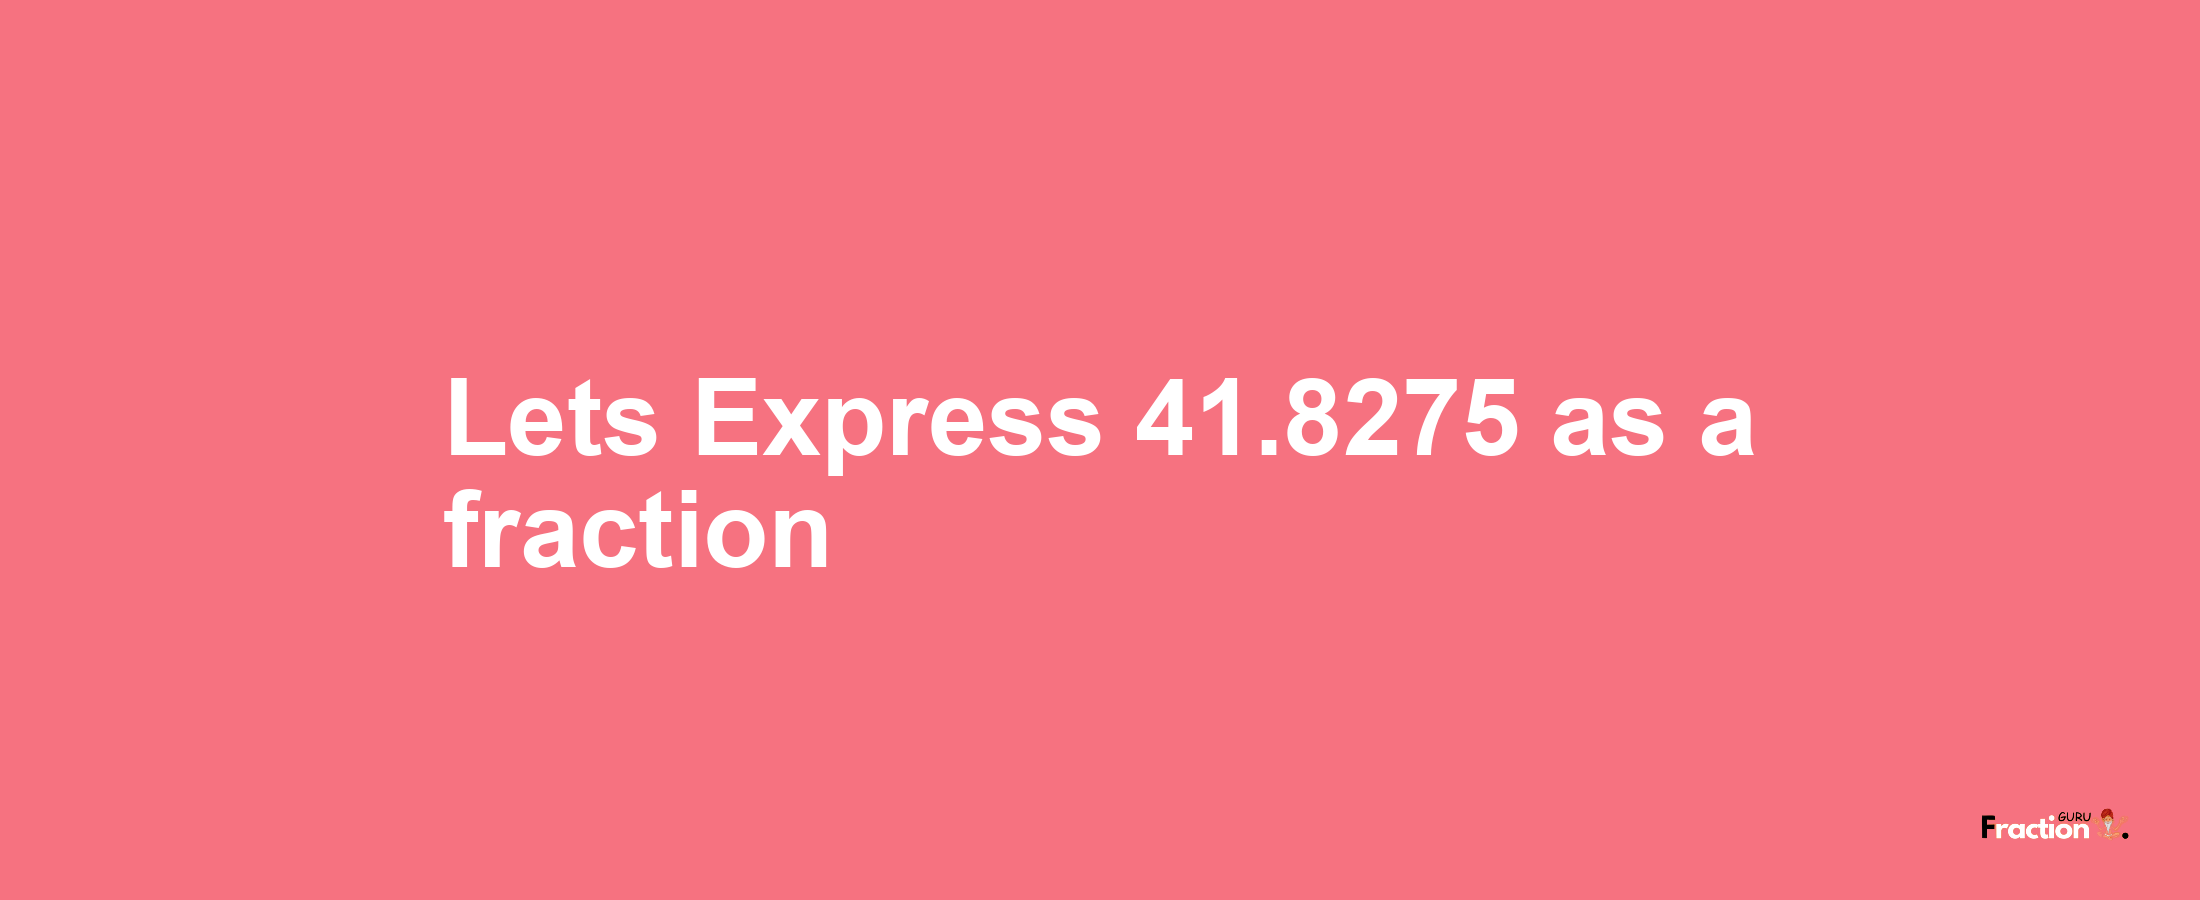 Lets Express 41.8275 as afraction